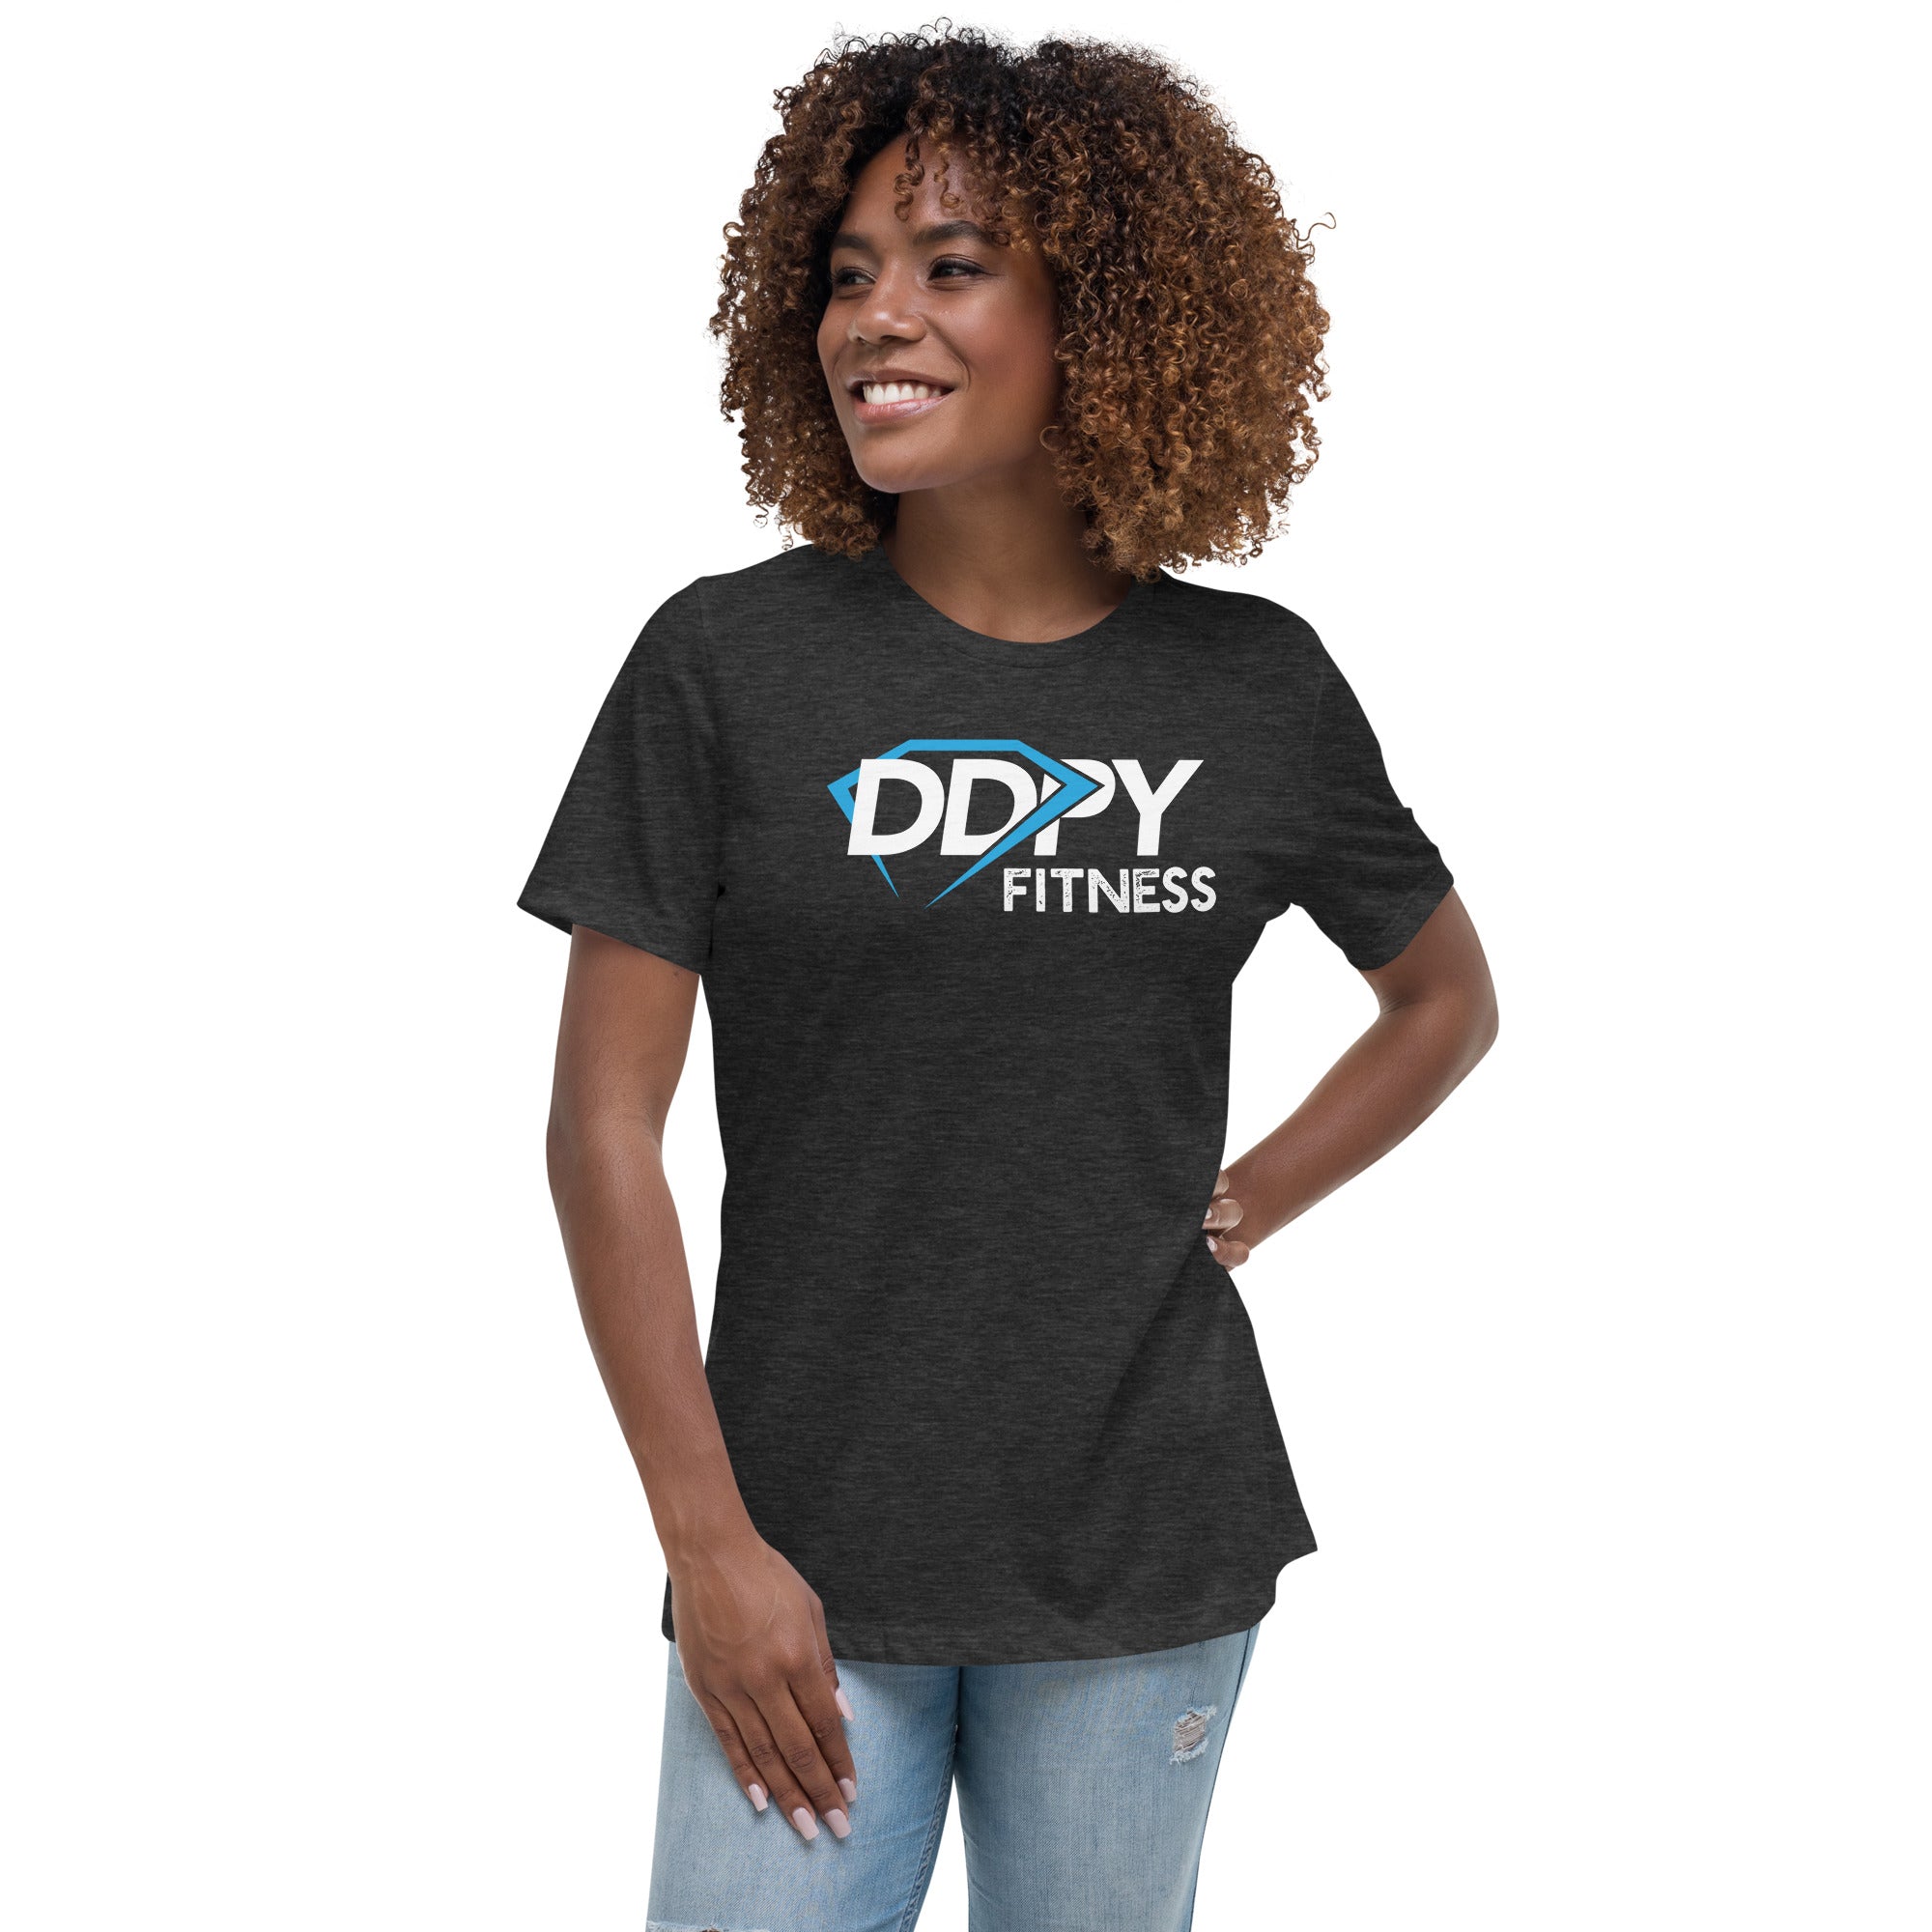 DDPY Fitness Women's Relaxed T-Shirt (On Demand Printing)